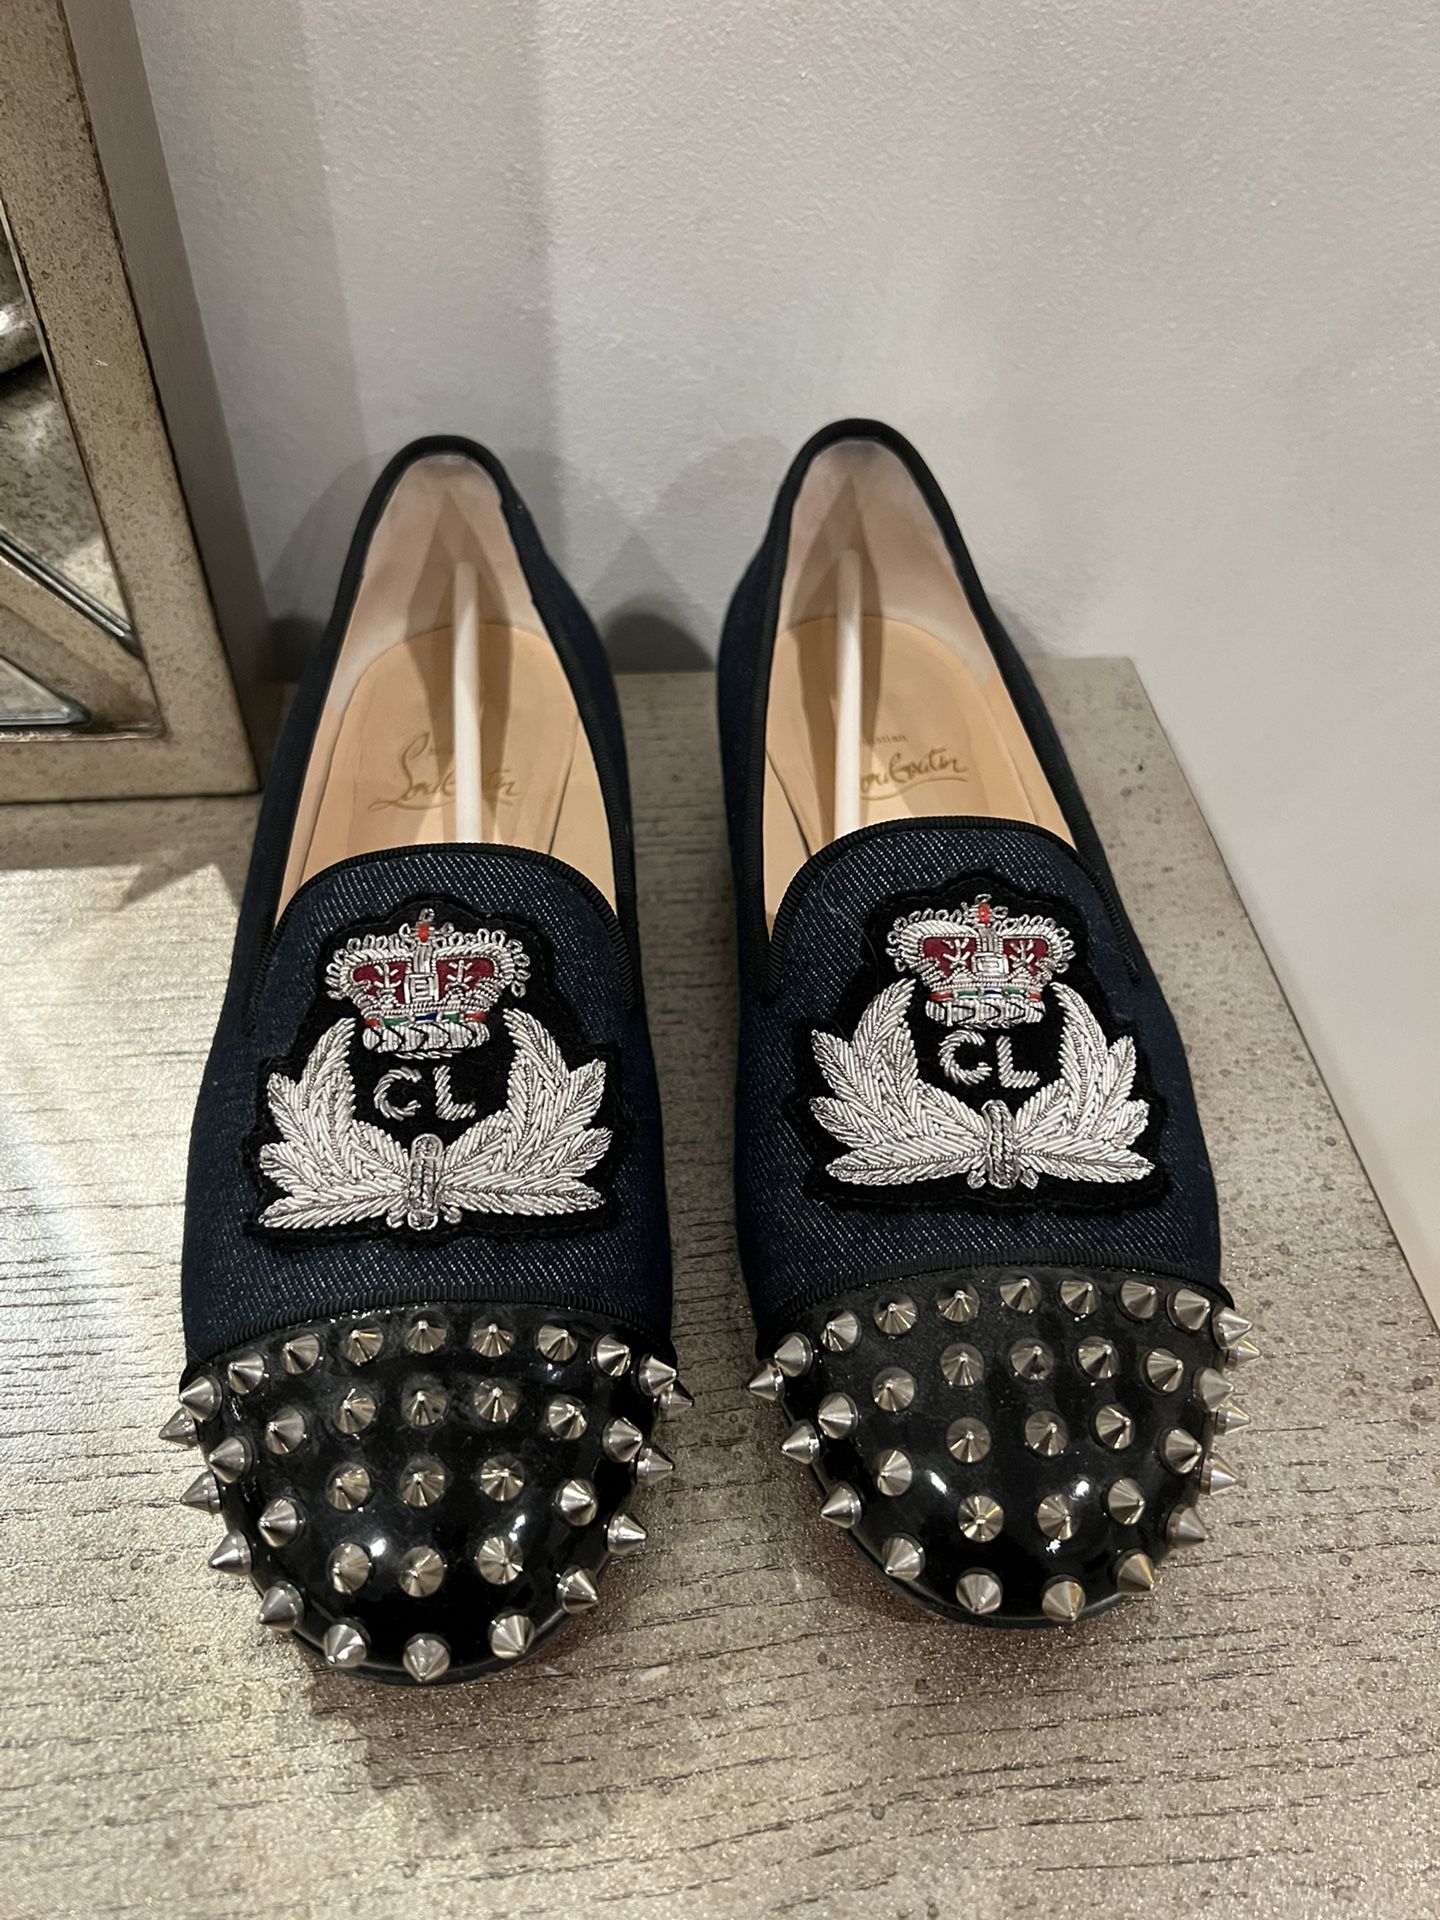 Christian Louboutin Flats for Sale in Miami, FL